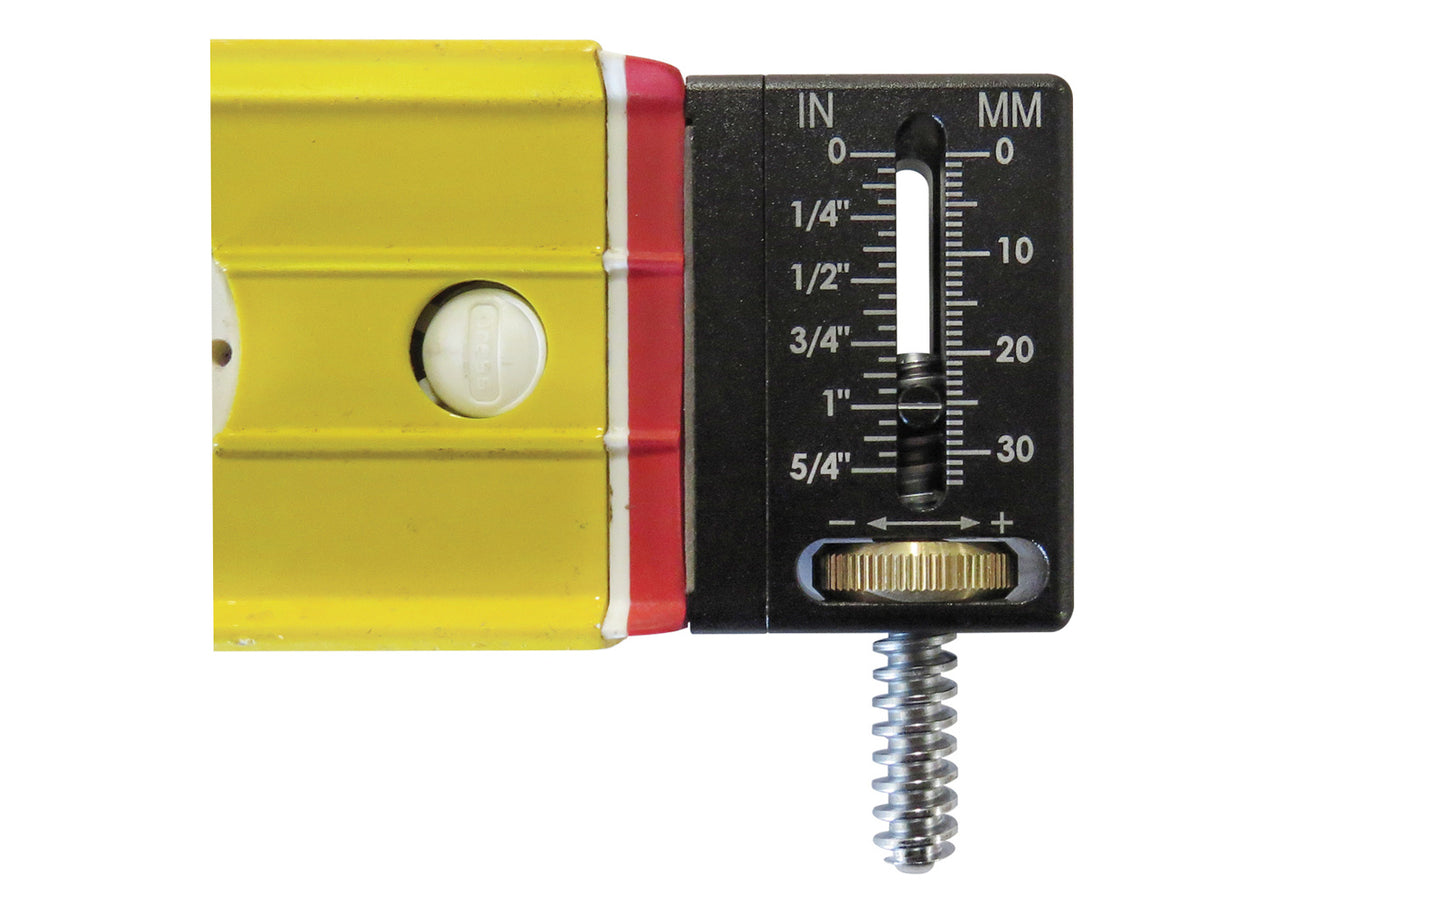 FastCap How Far Out? Universal Add-On Level Gauge - Model No. HOW FAR OUT - Fits Stabila 96 type levels & levels at least 2-3/8" tall